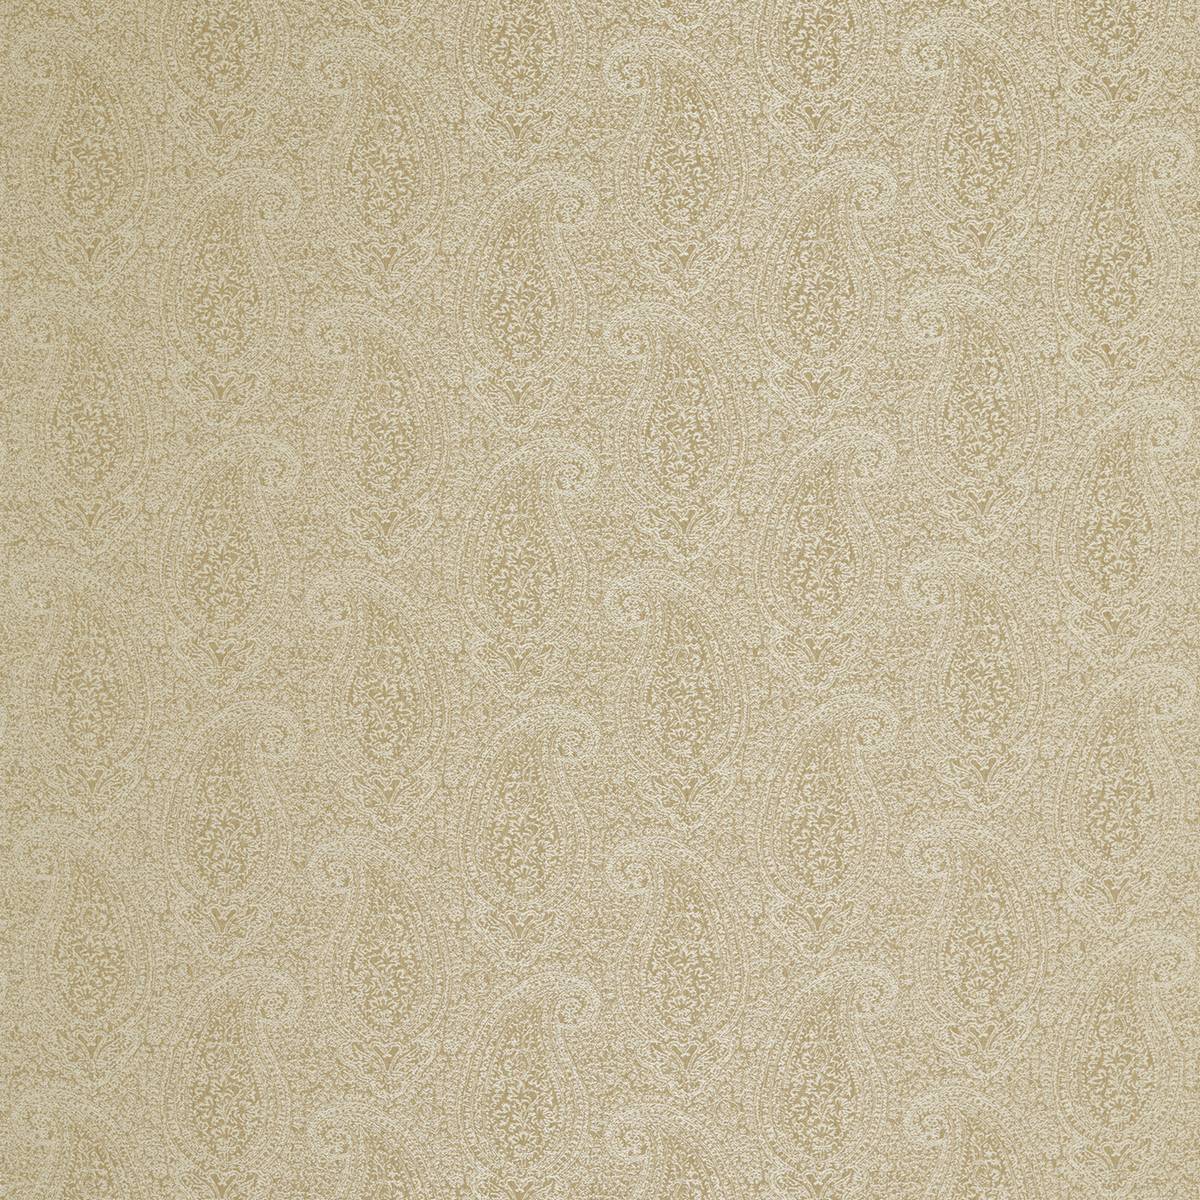 Cleadon Gold Fabric by Zoffany